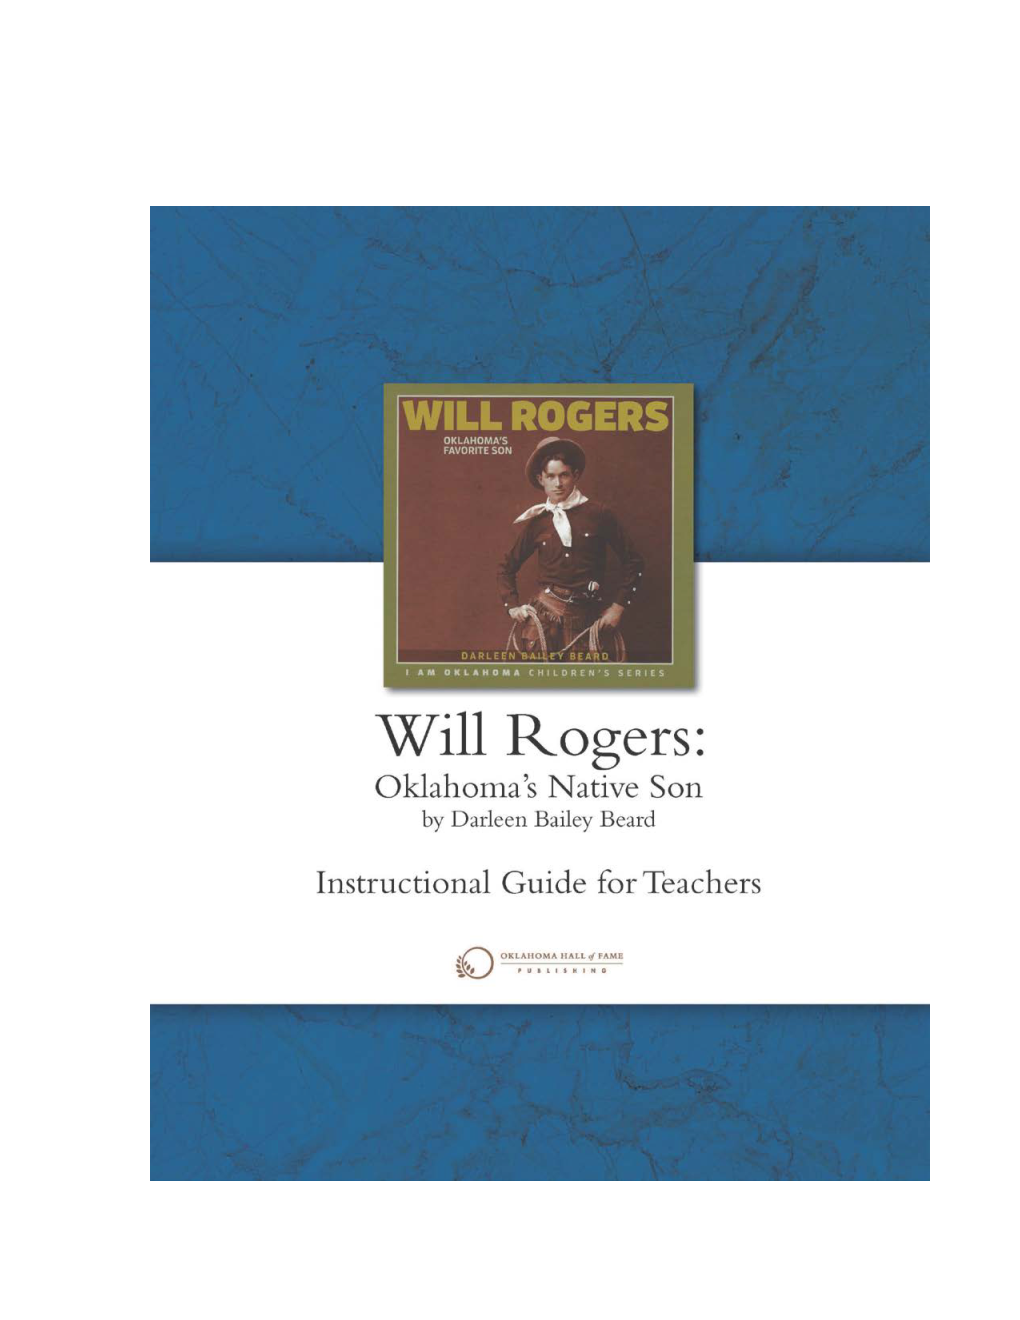 Will Rogers Instructional Guide for Teachers.Pdf